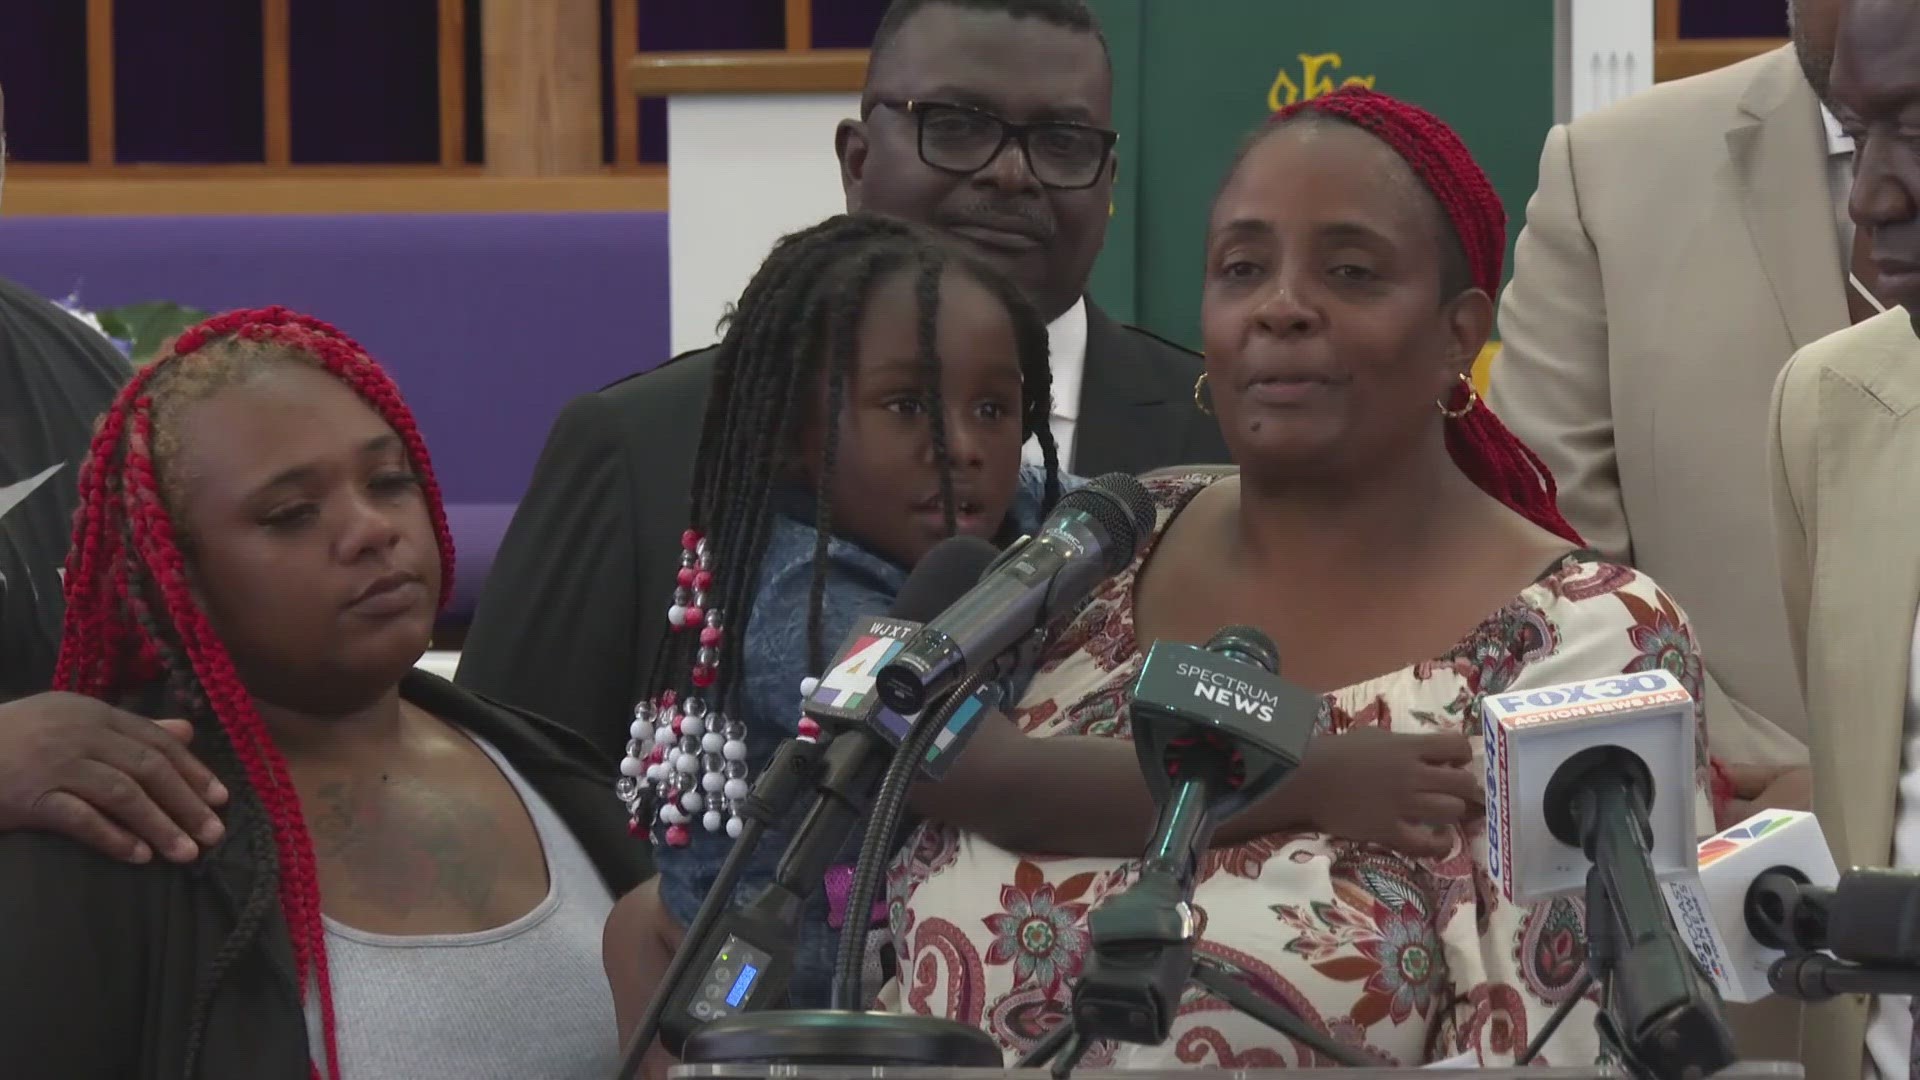 Three lives were taken Saturday when a racist gunman set out to kill Black people. Now, the families of the victims are speaking out.